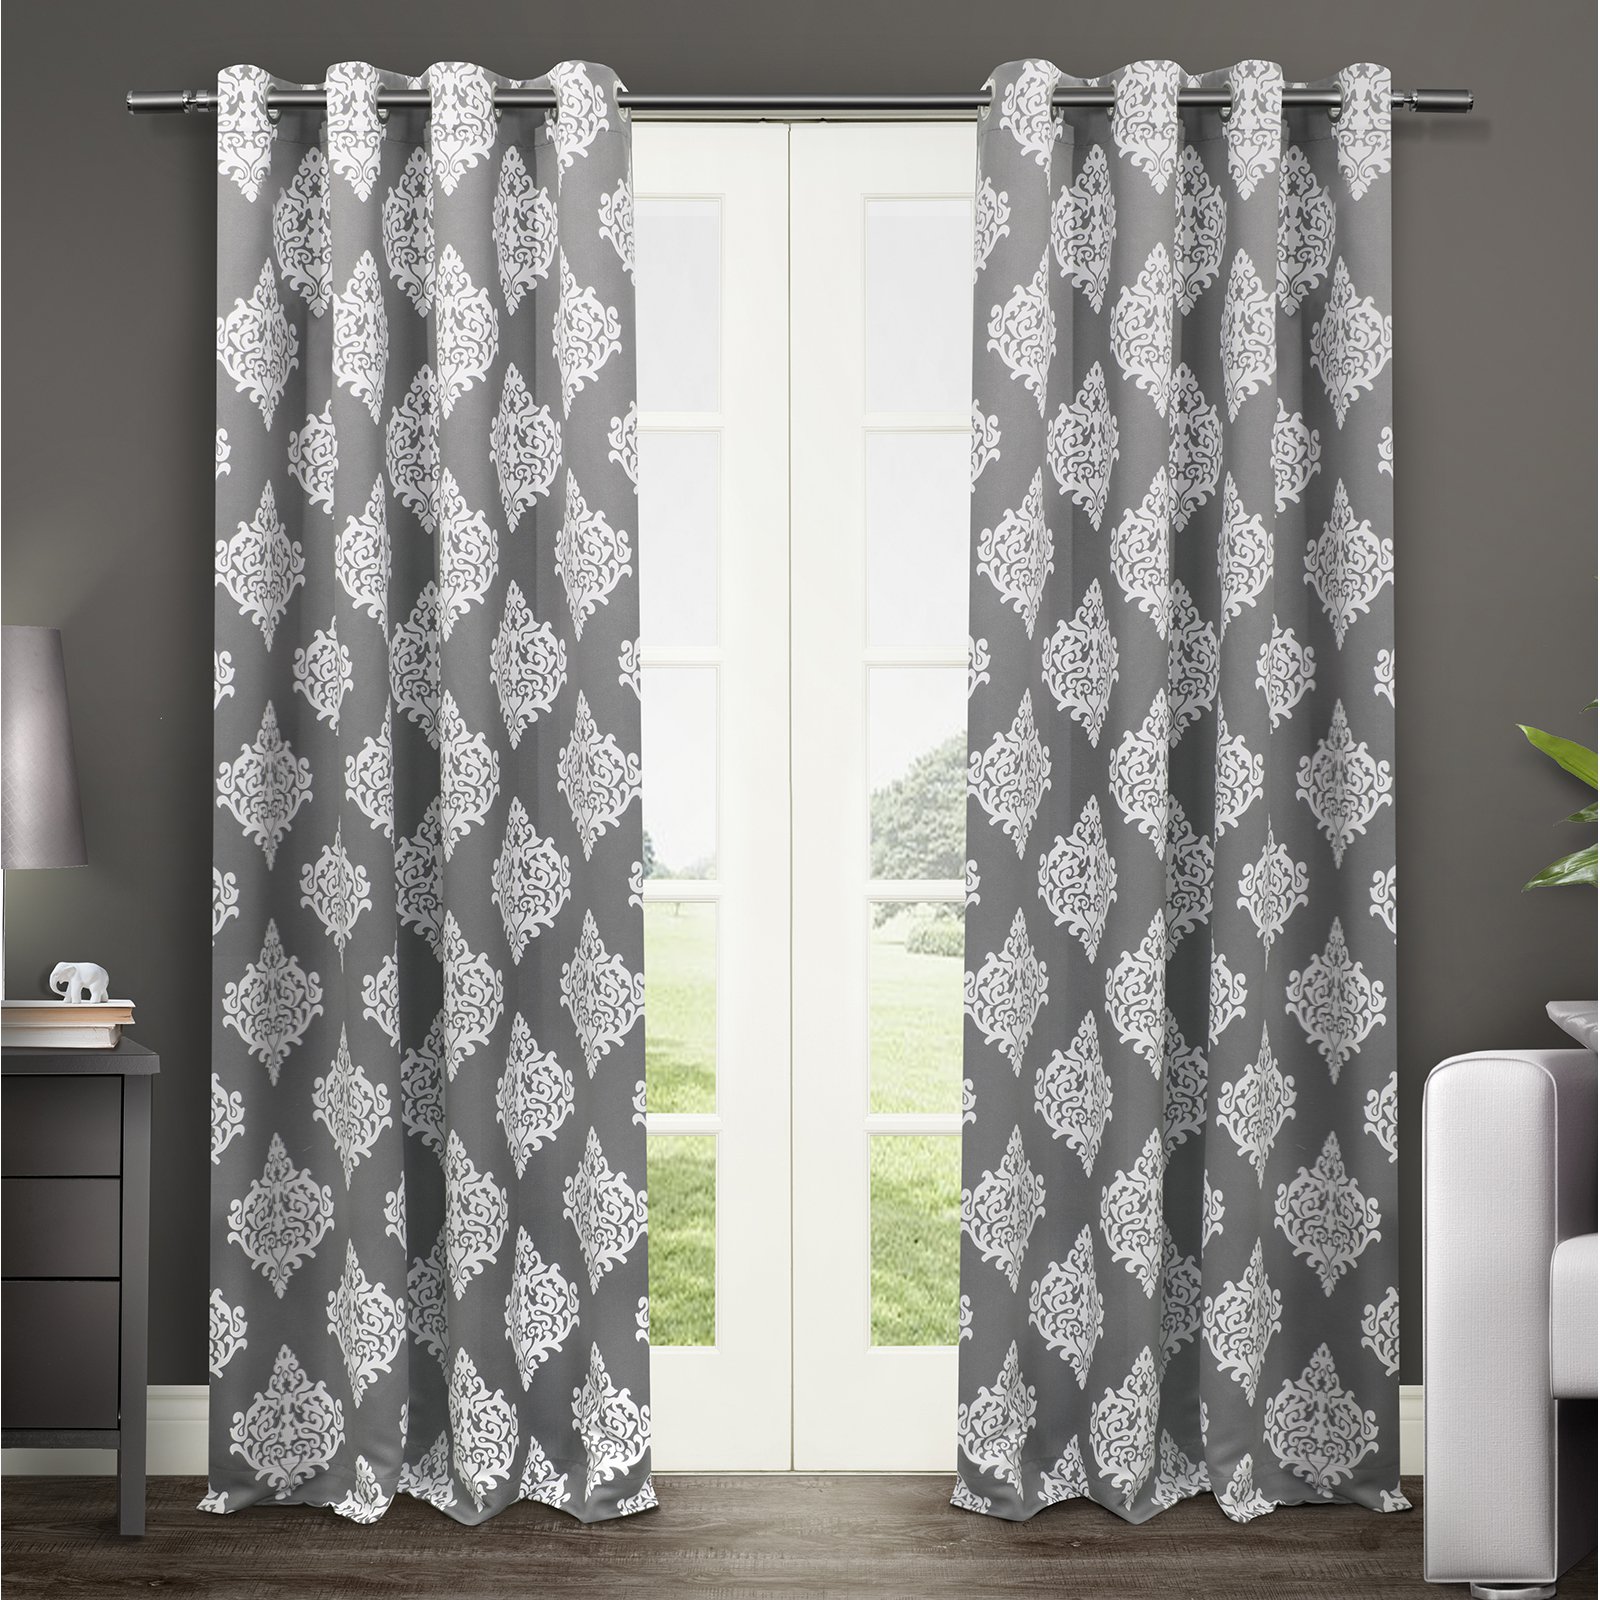 Exclusive Home Medallion Room Darkening Blackout Grommet Top Curtain Panel Pair, 52"x84", Peacoat Blue - image 5 of 5